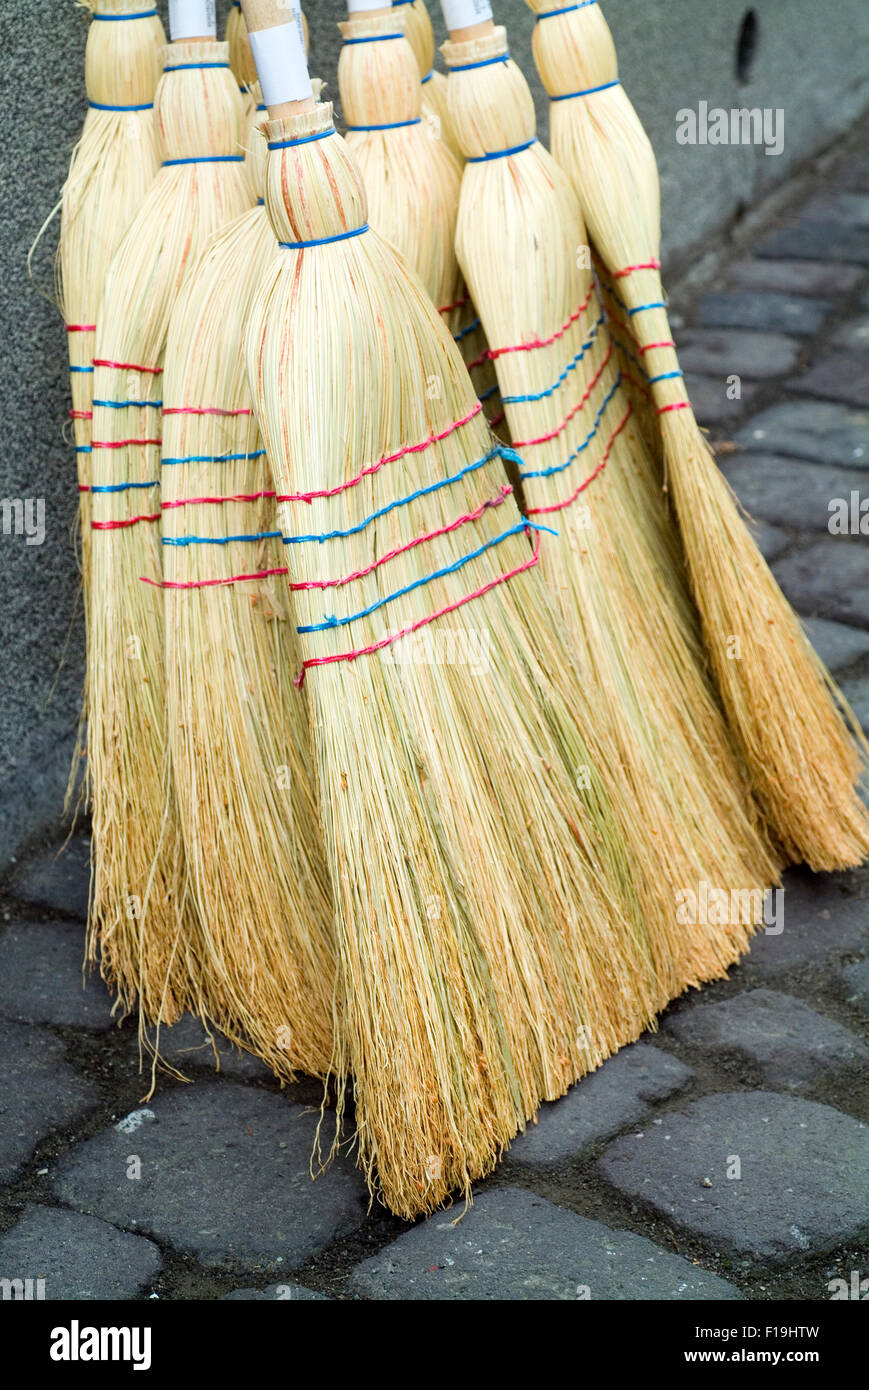 Brooms from nature materials on a market stall Stock Photo